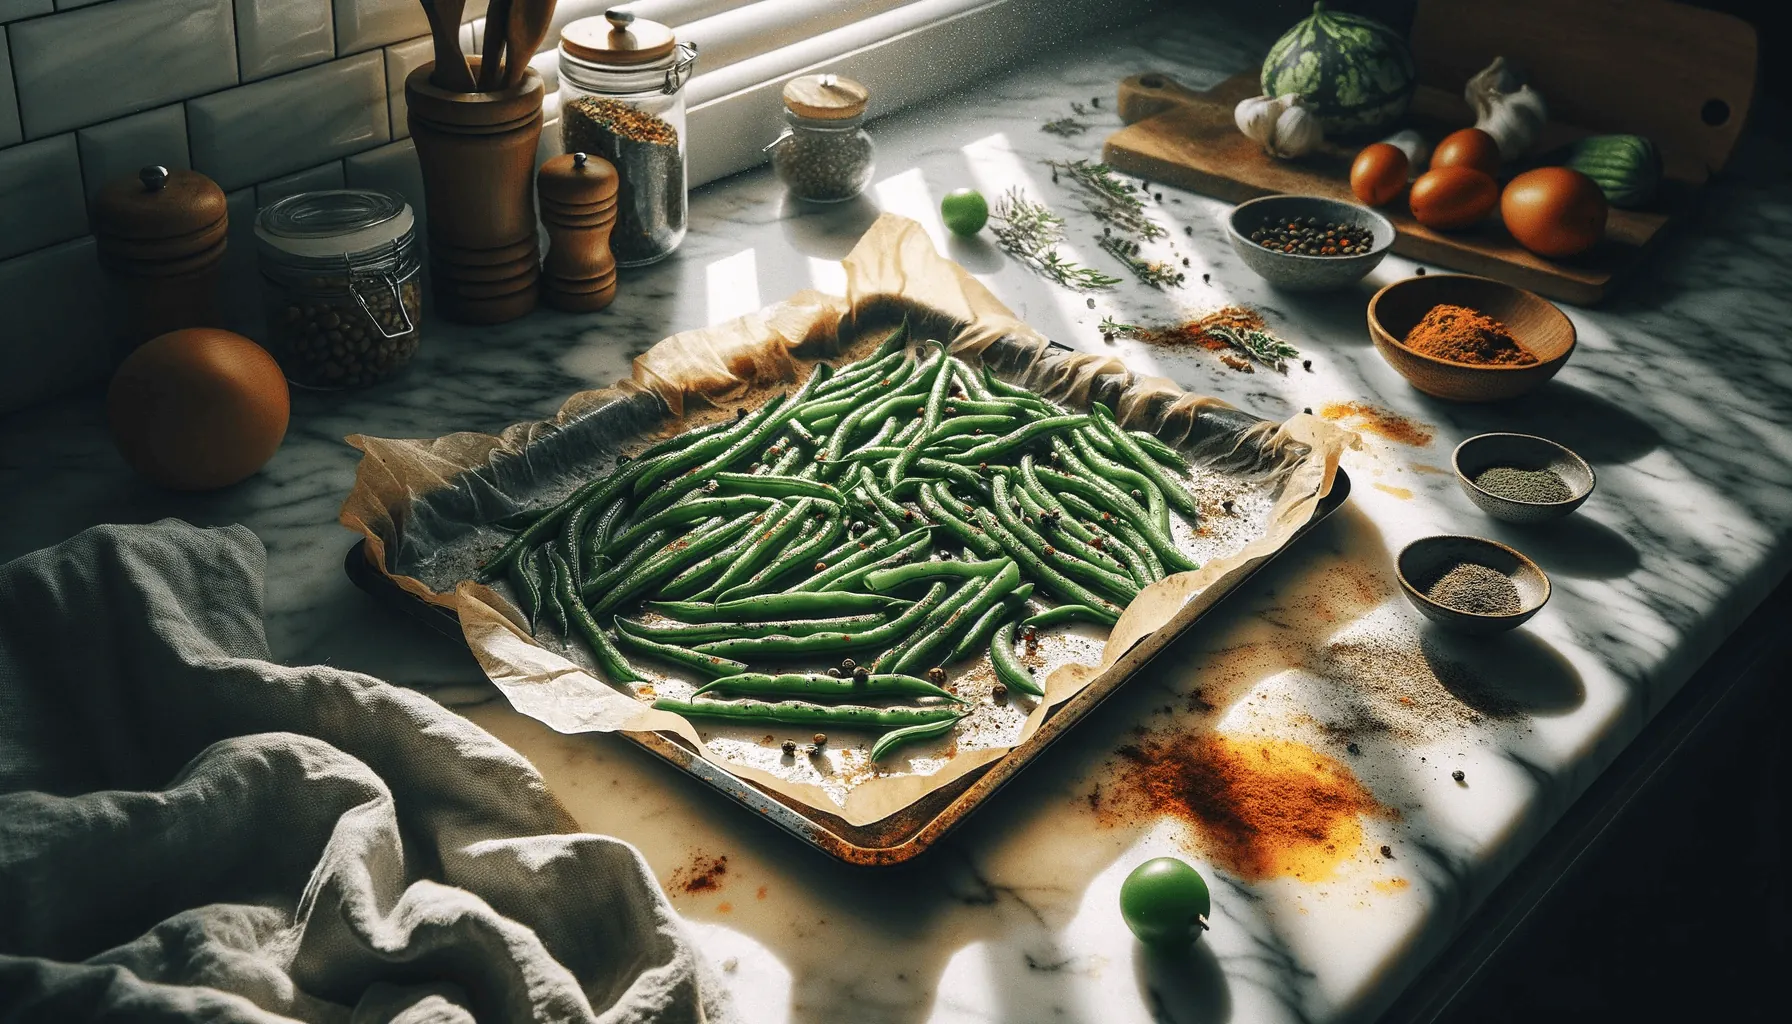 The making of roasted green beans